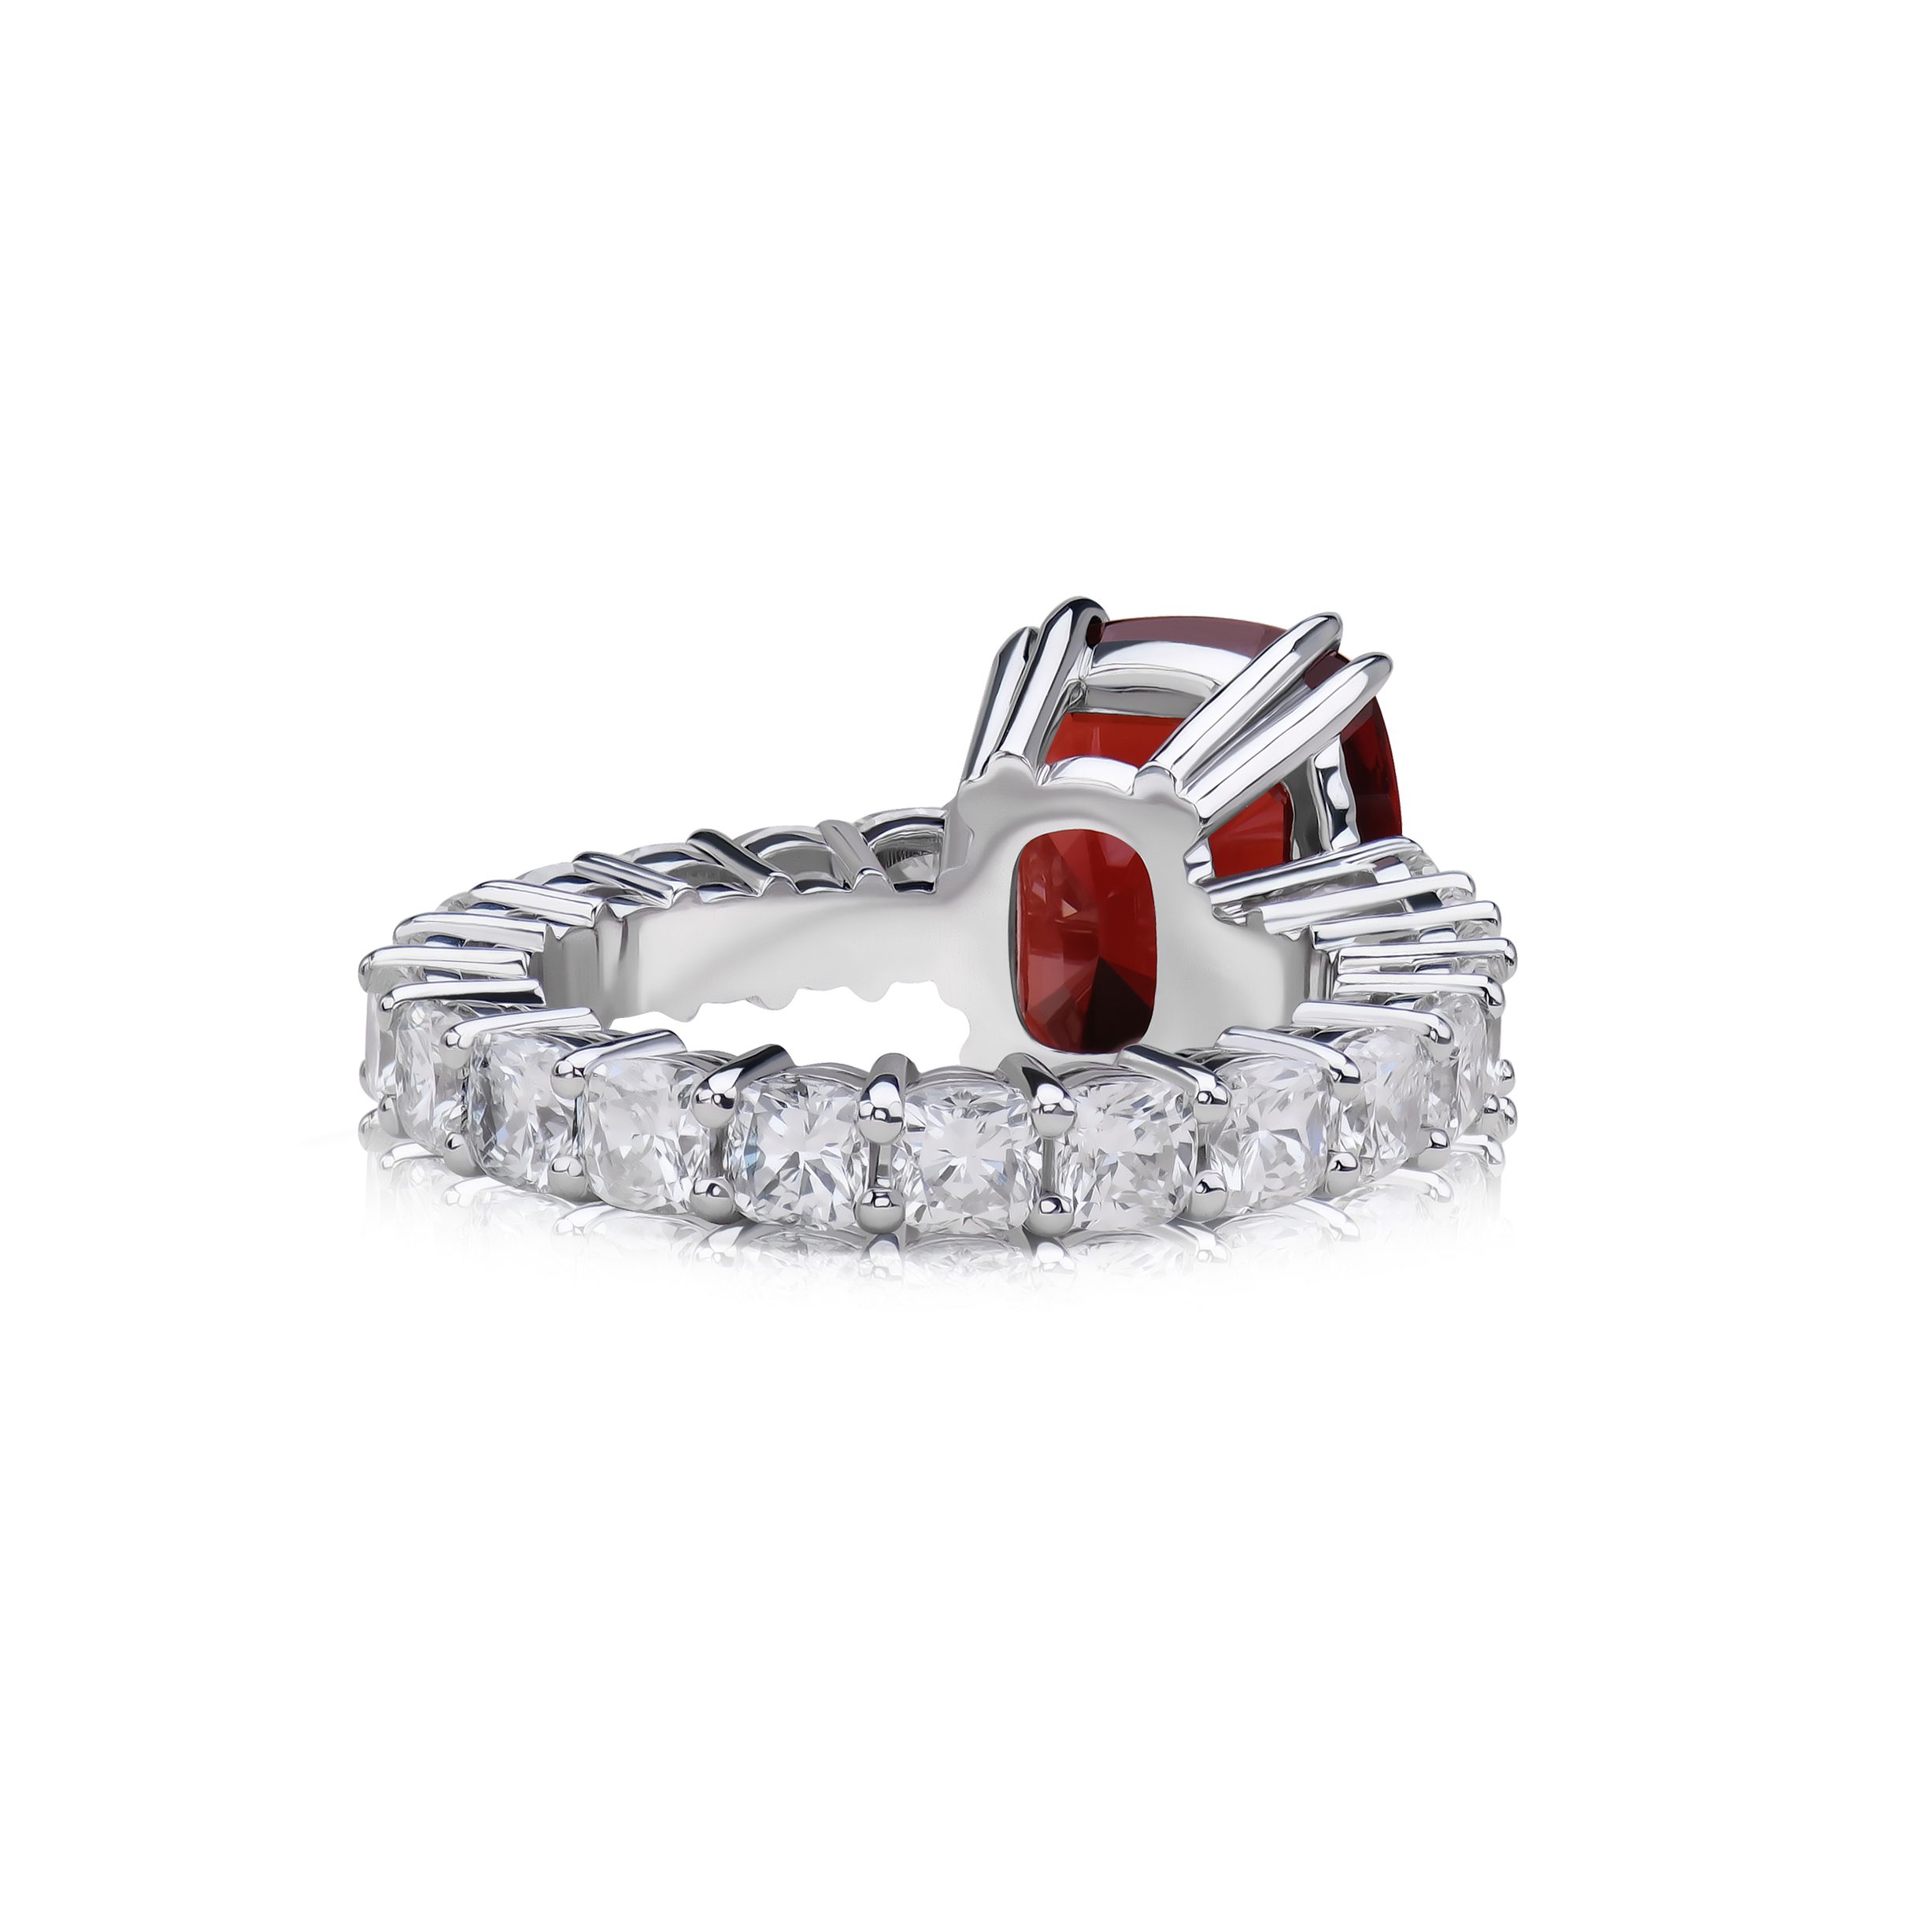 Spinel 5.57 ct ring with diamonds 3.06 ct #2